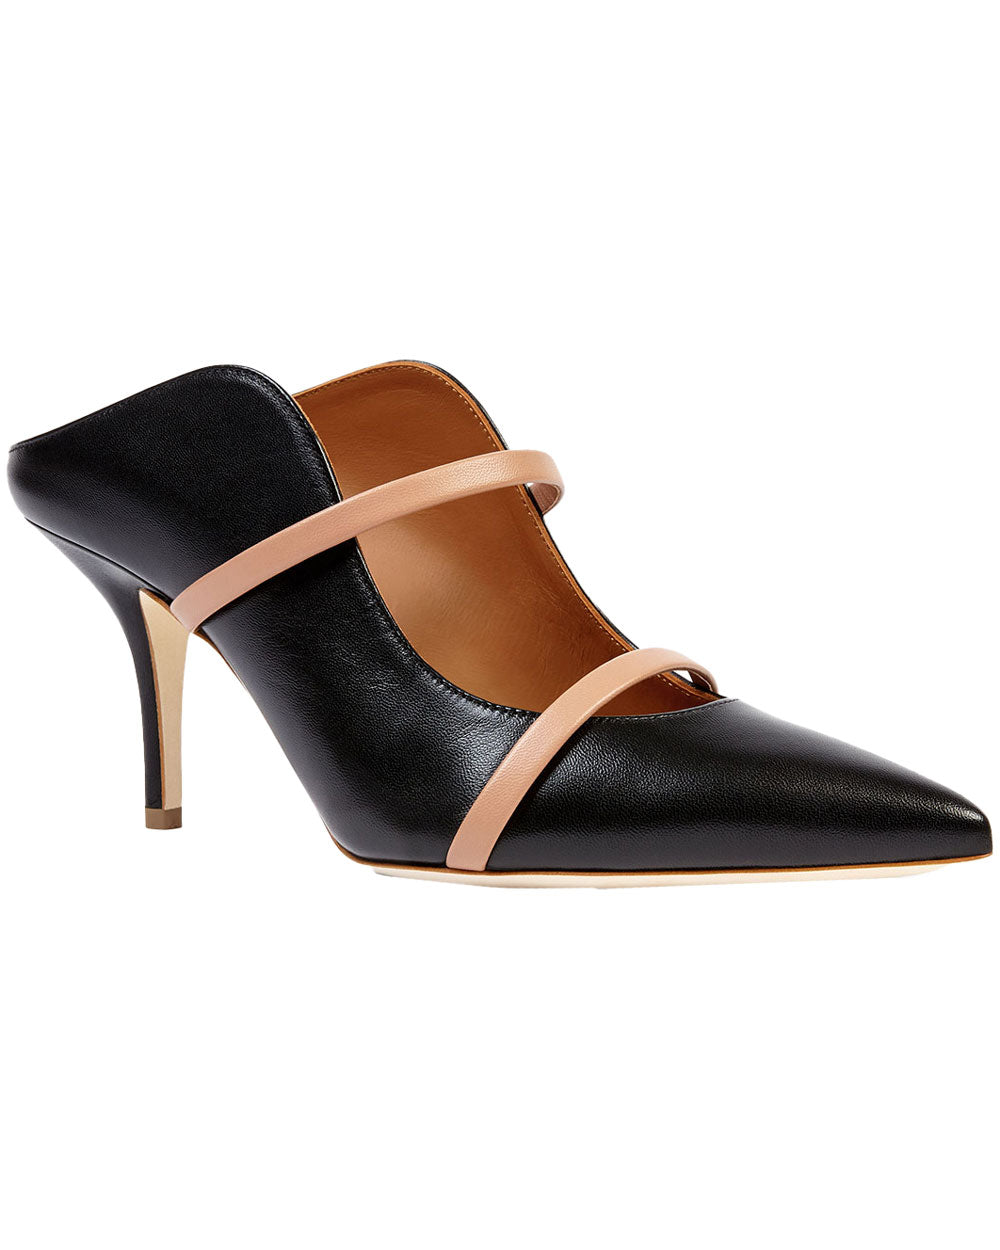 Maureen 70 Pump in Black and Nude